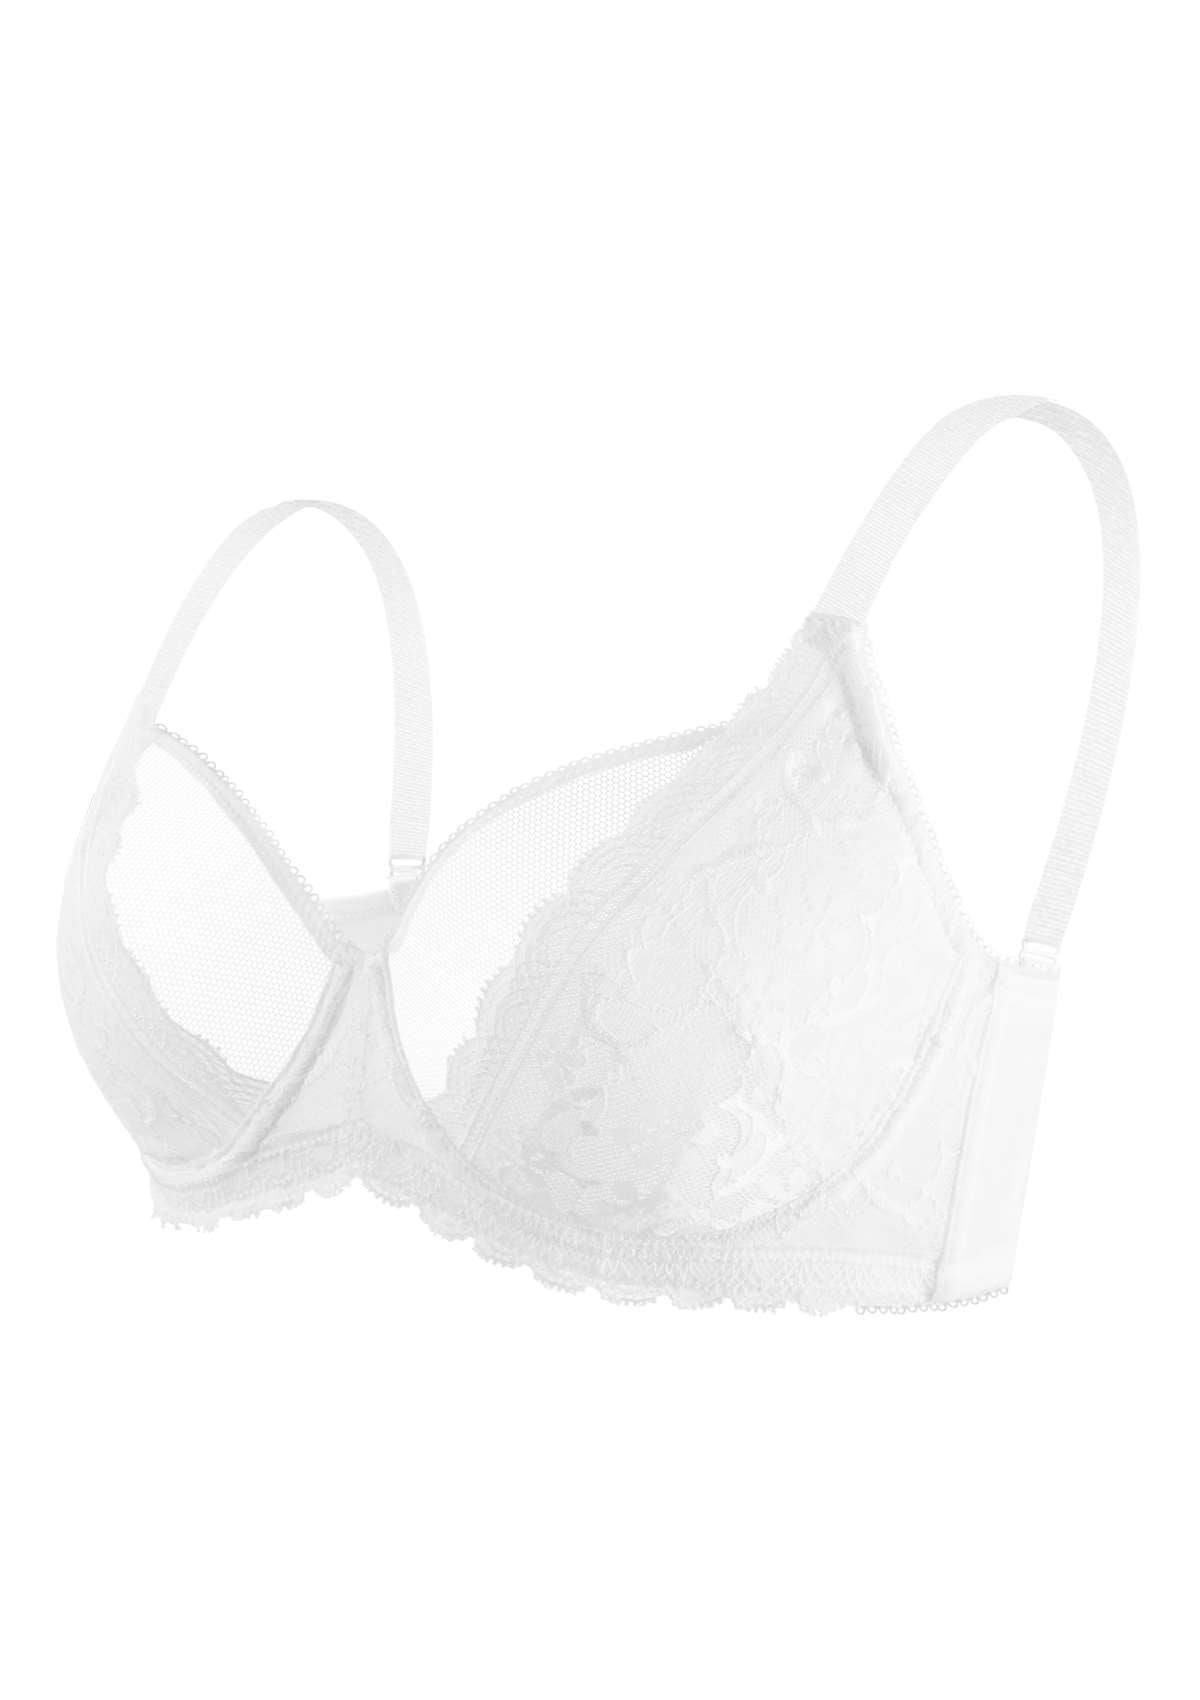 HSIA Anemone Big Bra: Best Bra For Lift And Support, Floral Bra - White / 40 / C